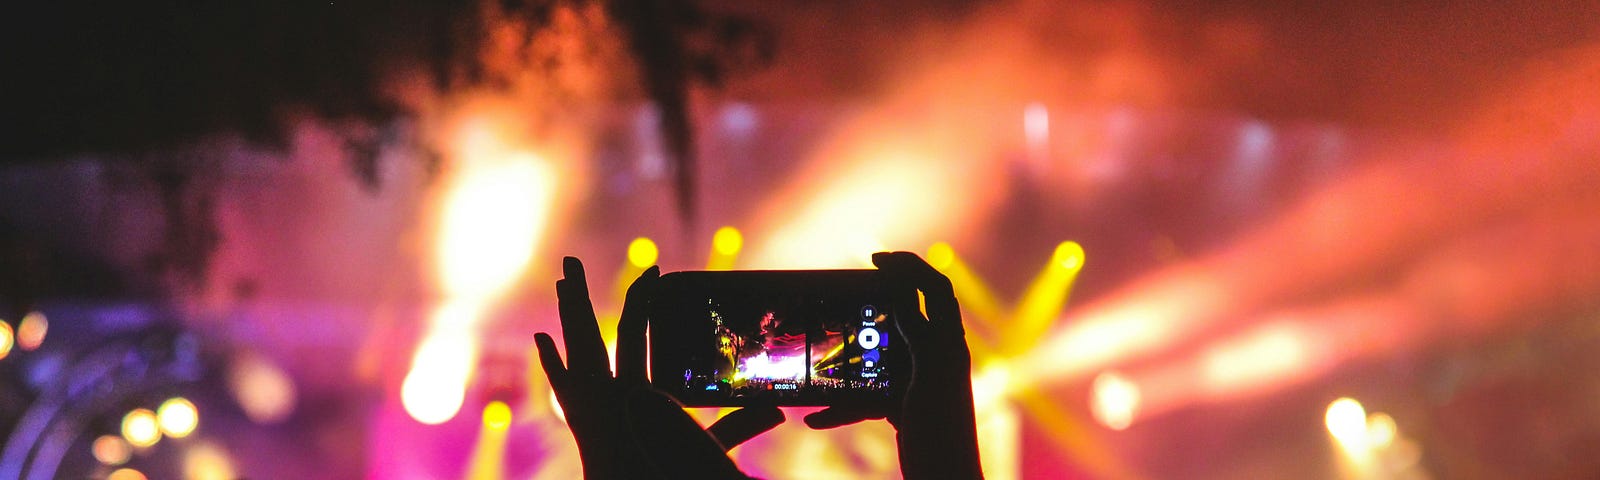 A person holding up a phone to record a concert